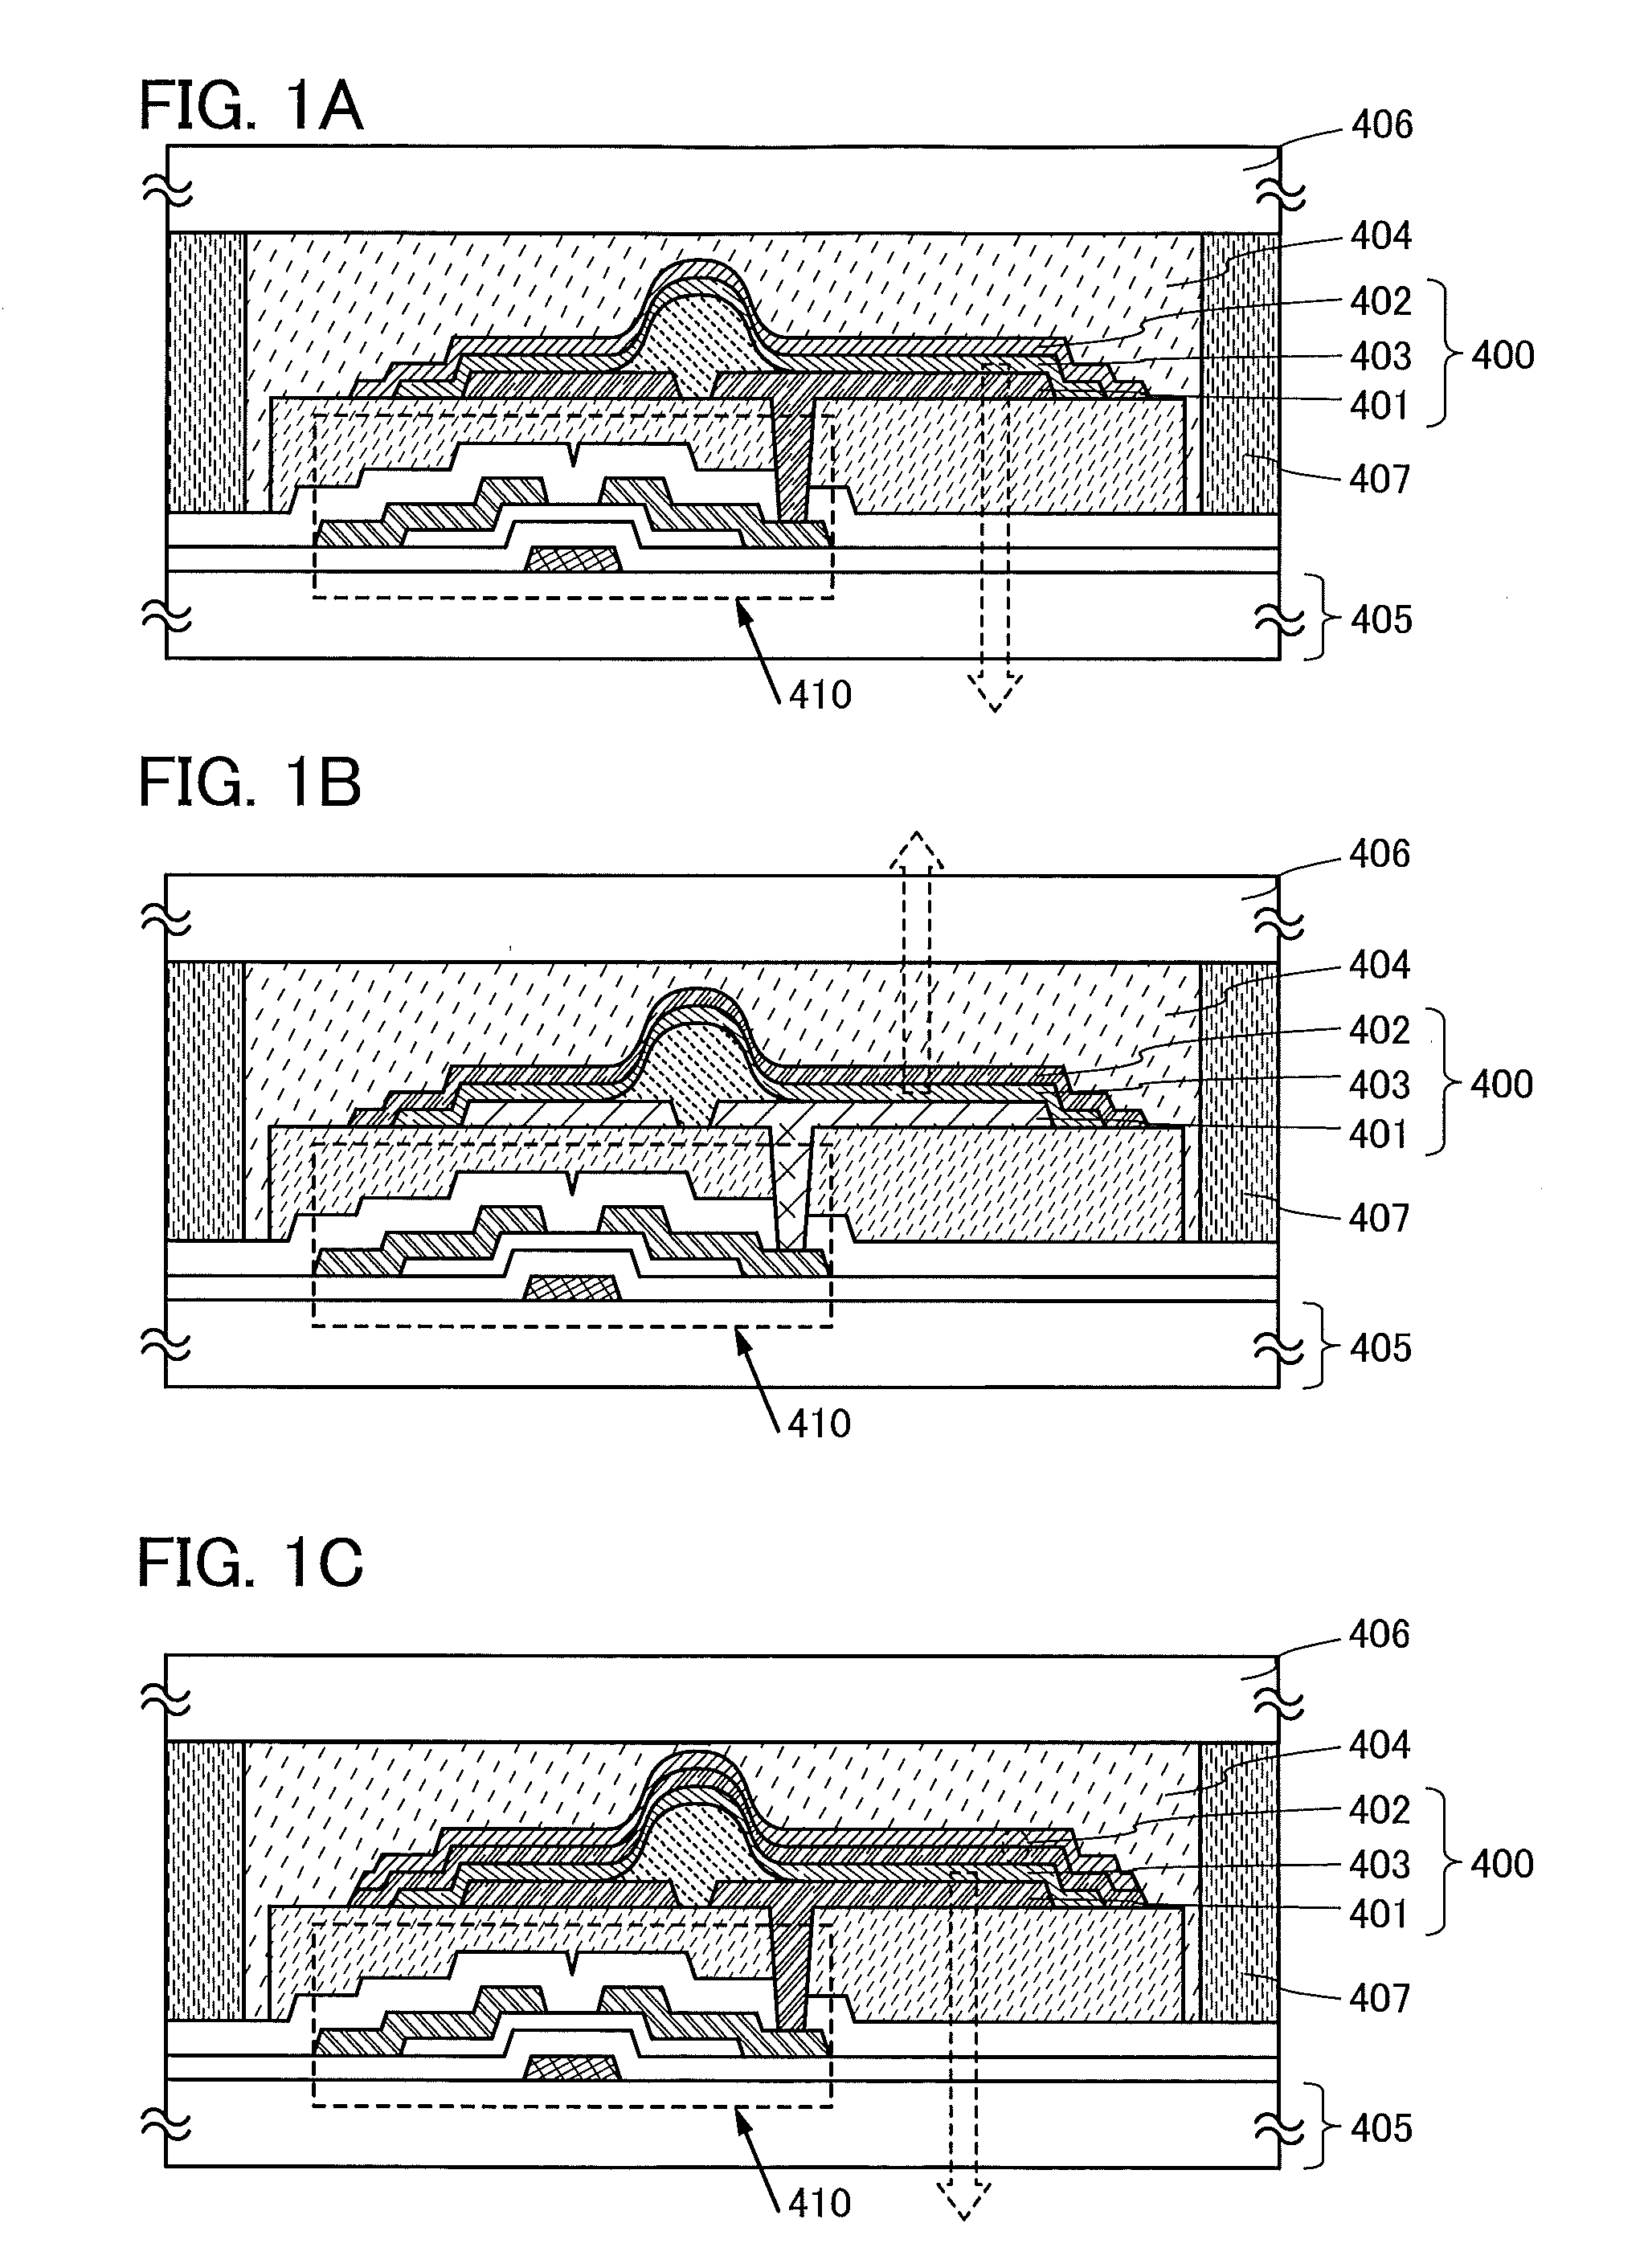 Semiconductor device and light-emitting device, and manufactuirng method thereof